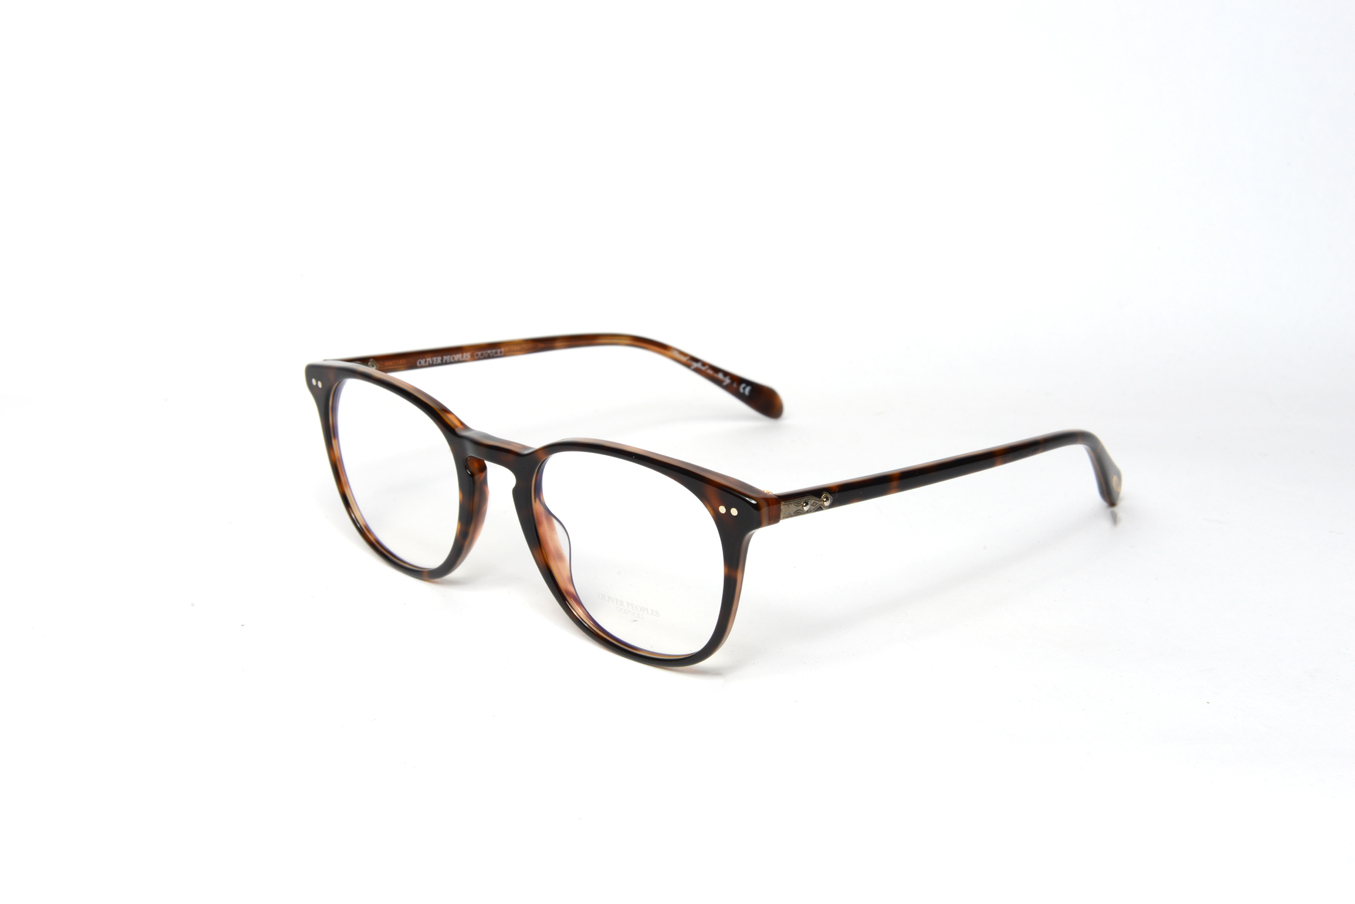 Oliver Peoples Sir Finley - Piccadilly Opticians Birmingham